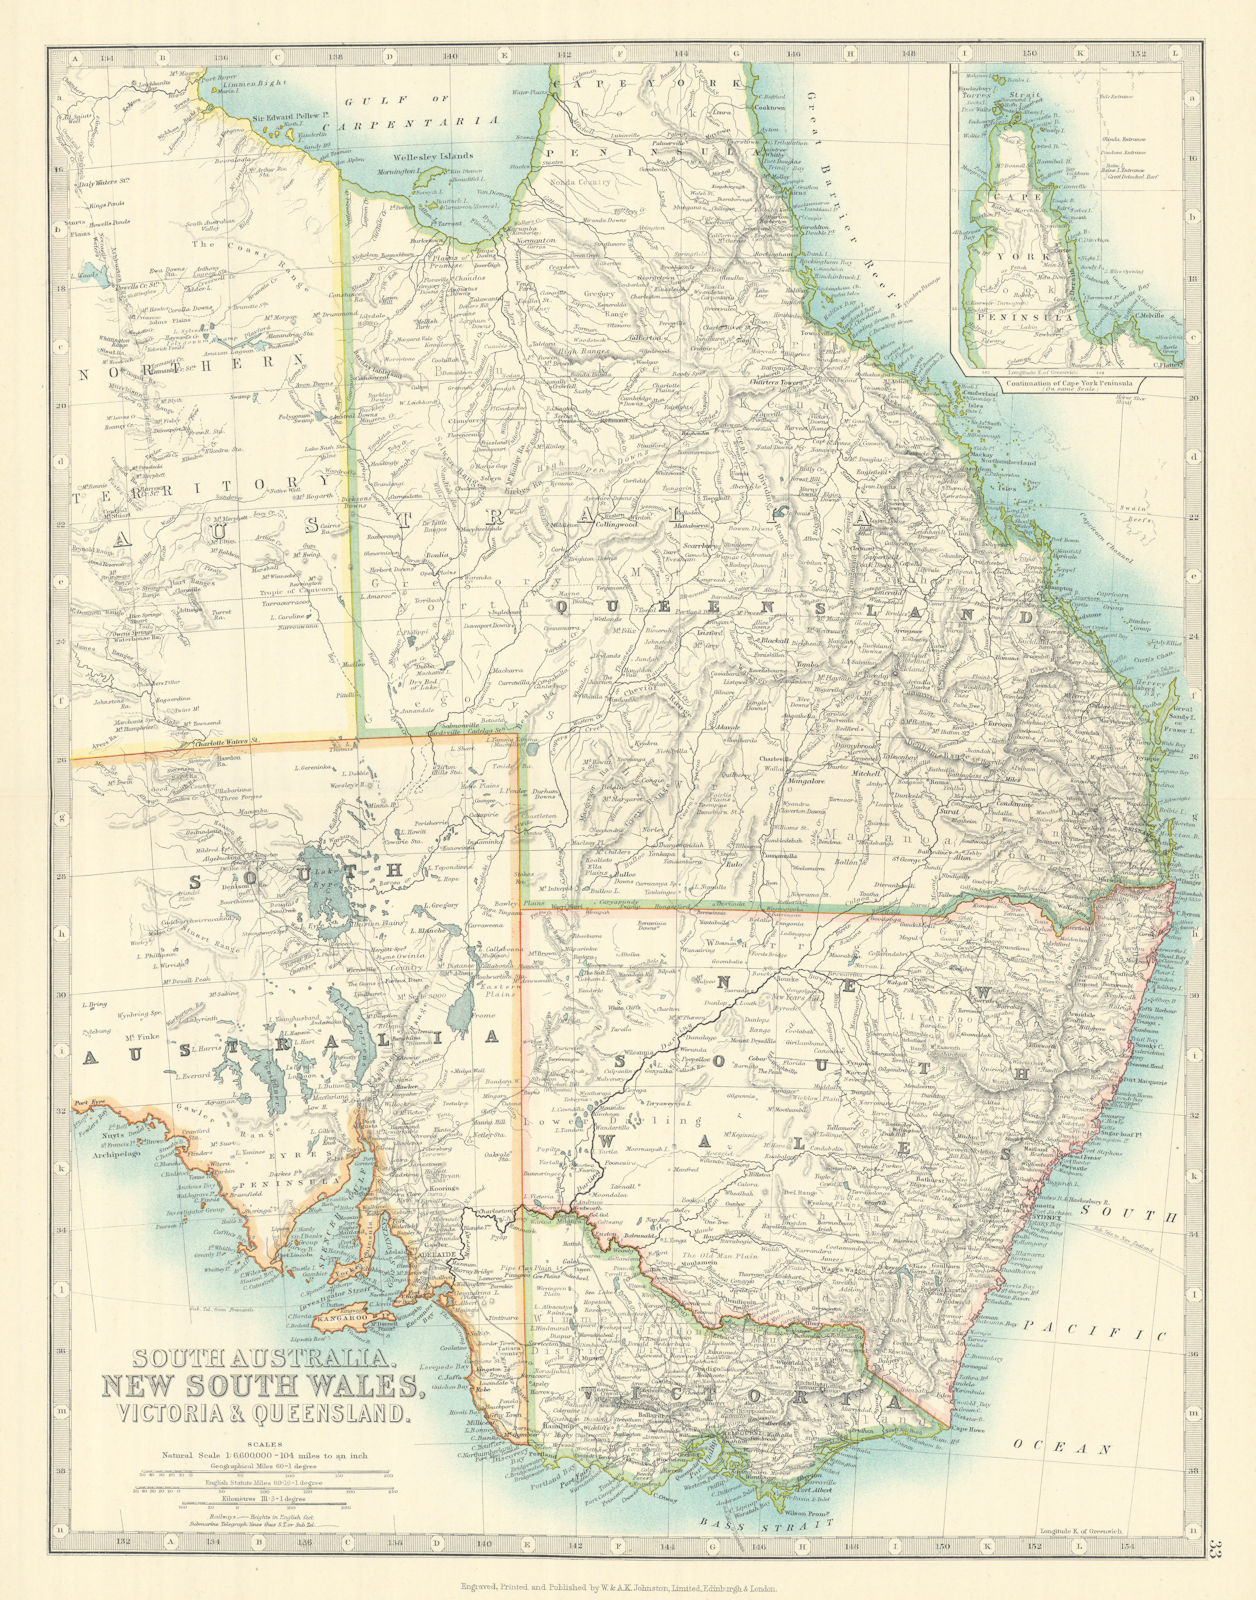 Associate Product EASTERN AUSTRALIA. Queensland, New South Wales & Victoria. JOHNSTON 1913 map